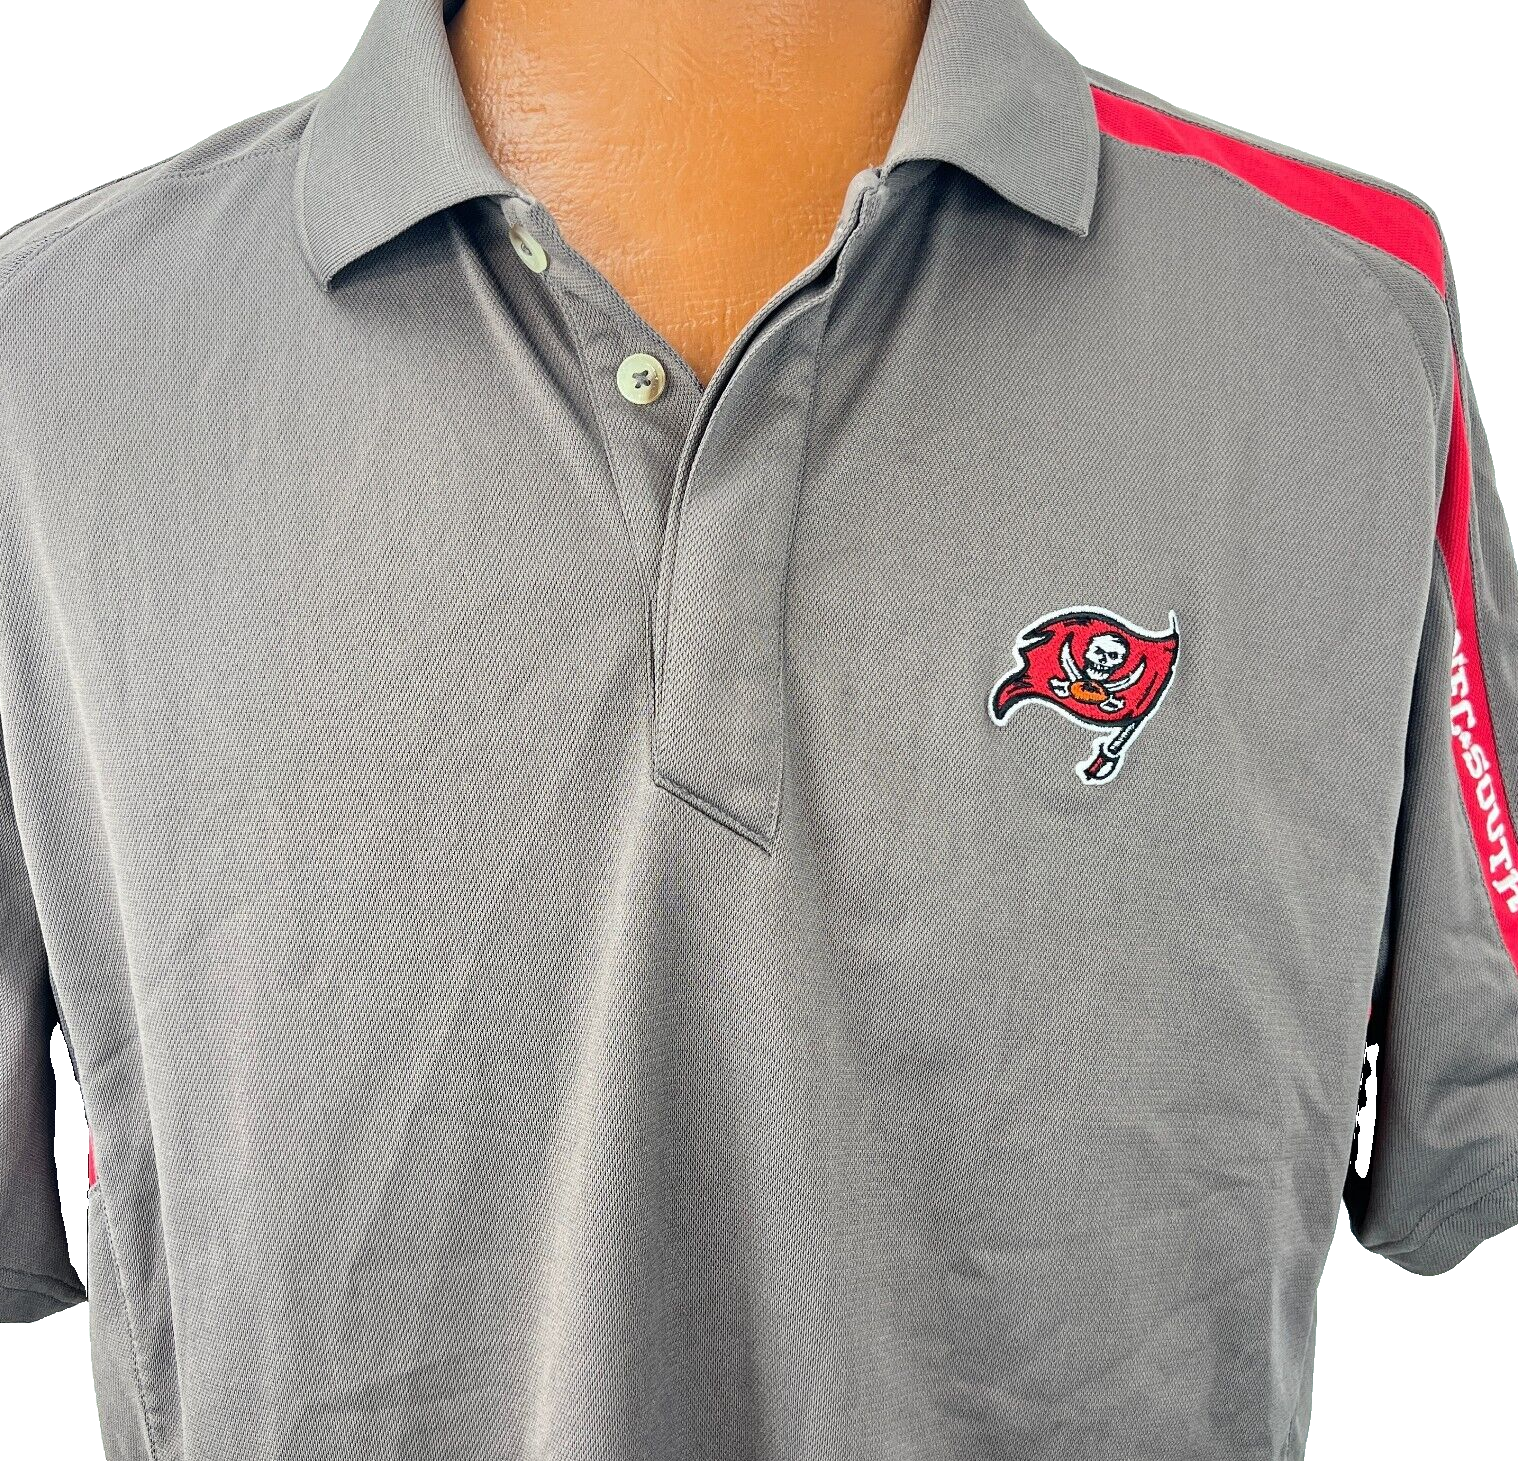 Primary image for Tampa Bay Buccaneers Reebok NFL Football Polo XL Shirt NFC South Jolly Roger